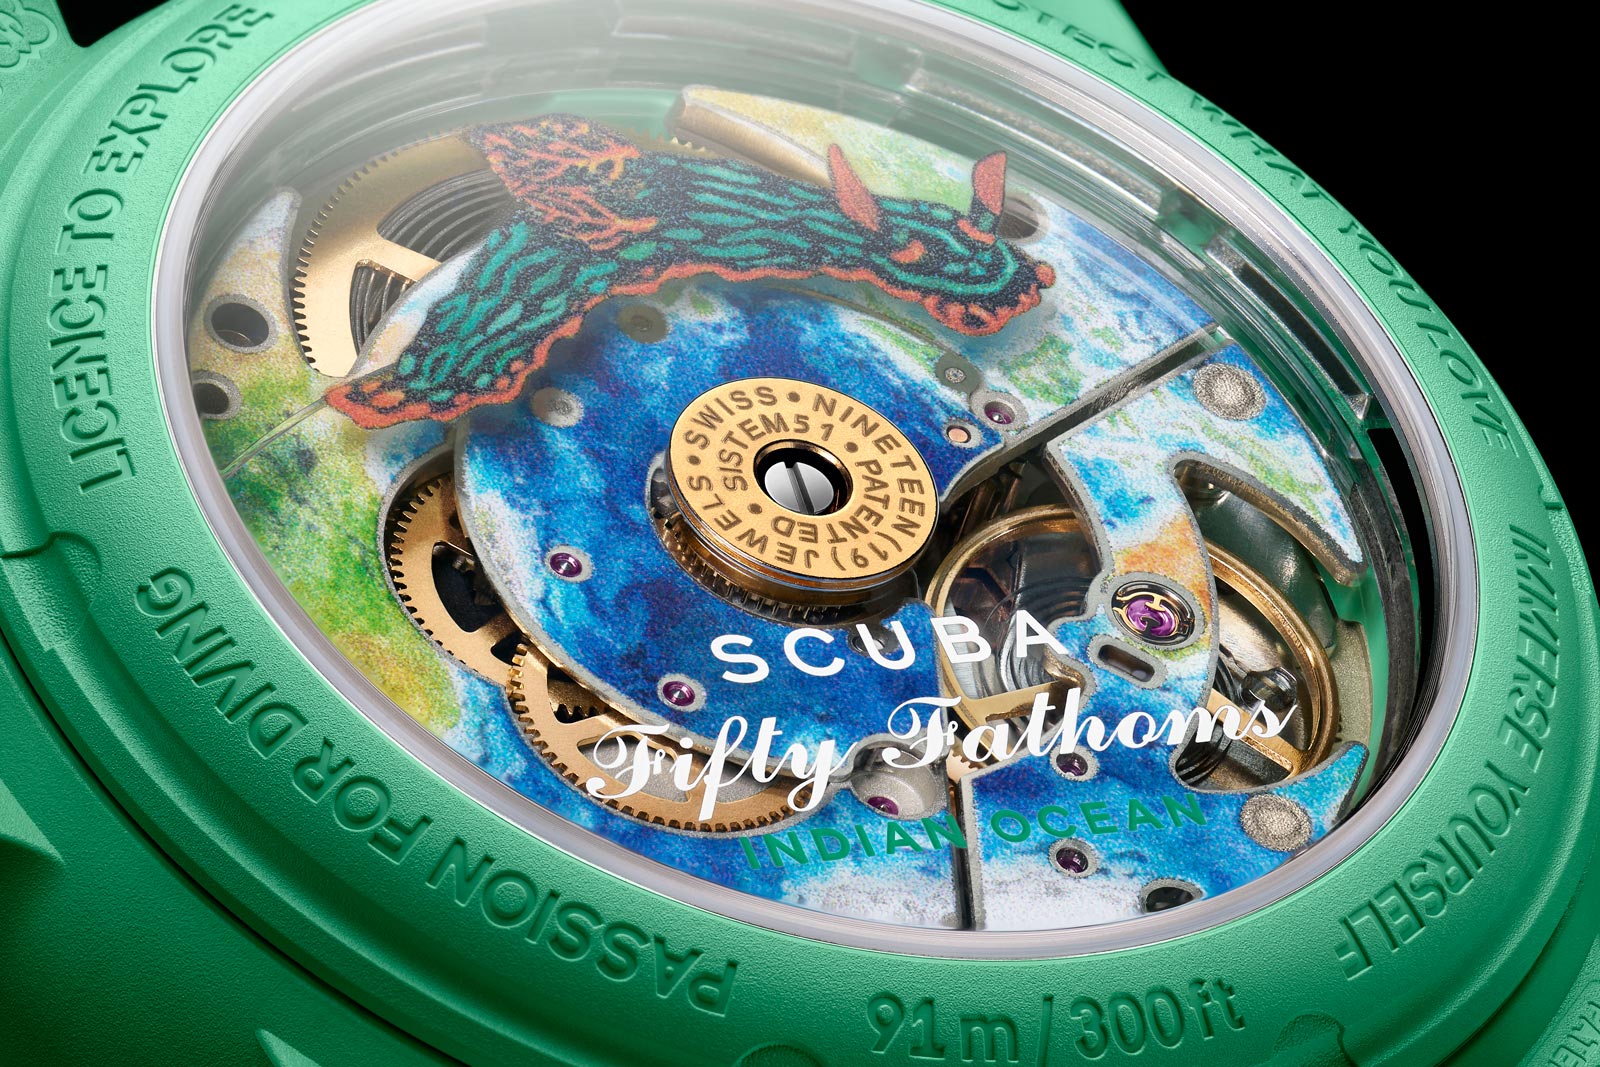 Blancpain and Swatch Team Up on the $400 Bioceramic Scuba Fifty